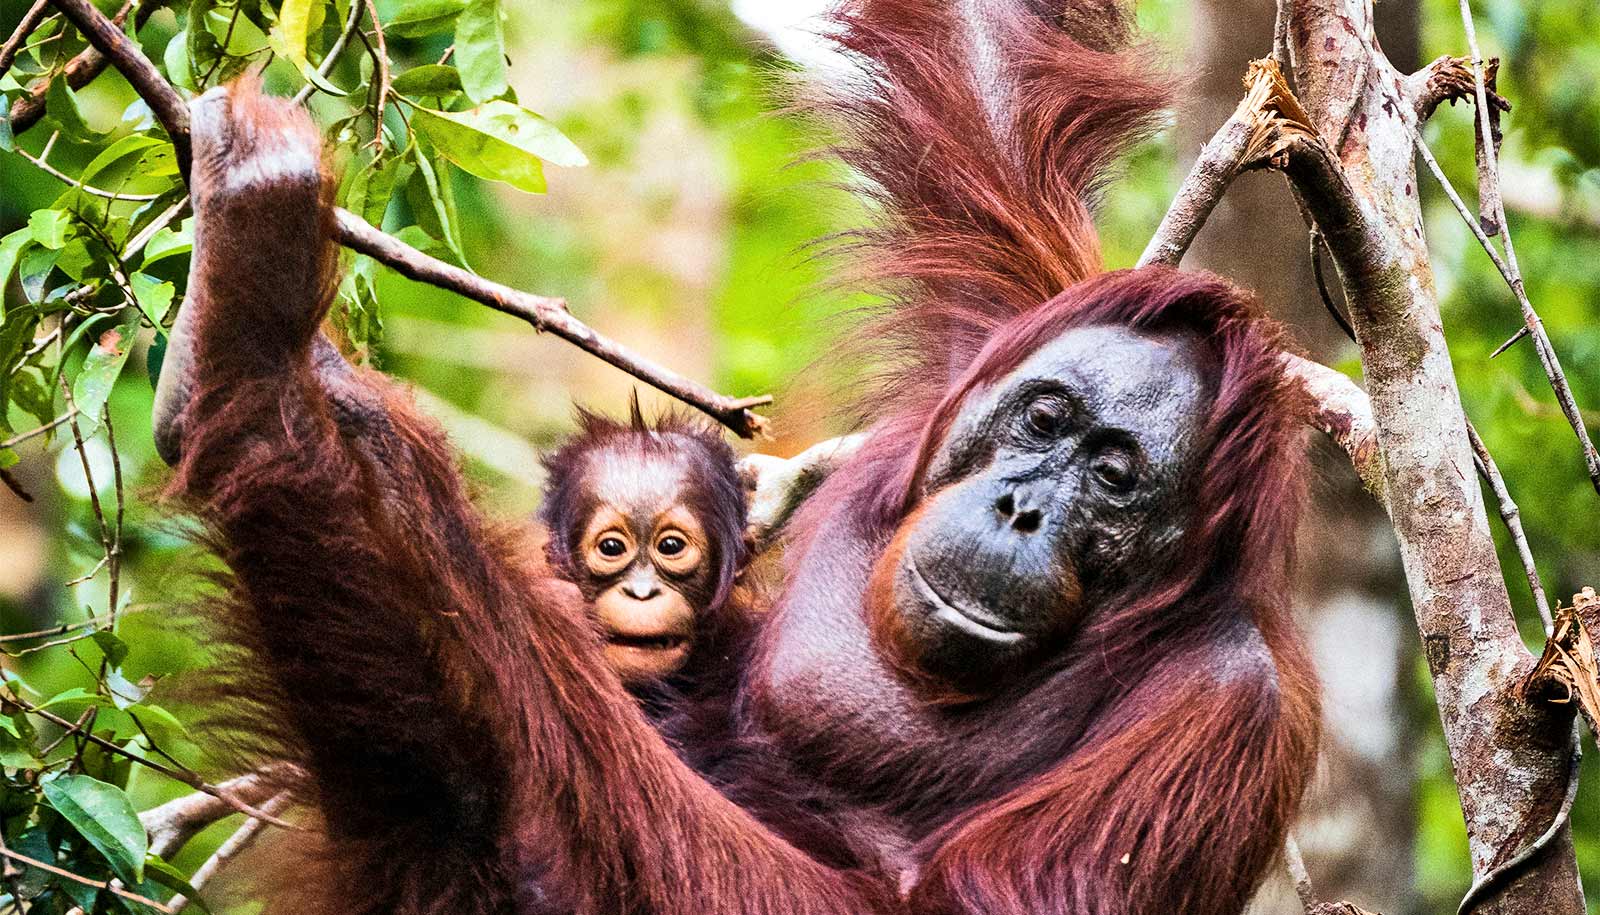 We need new conservation methods to save great apes